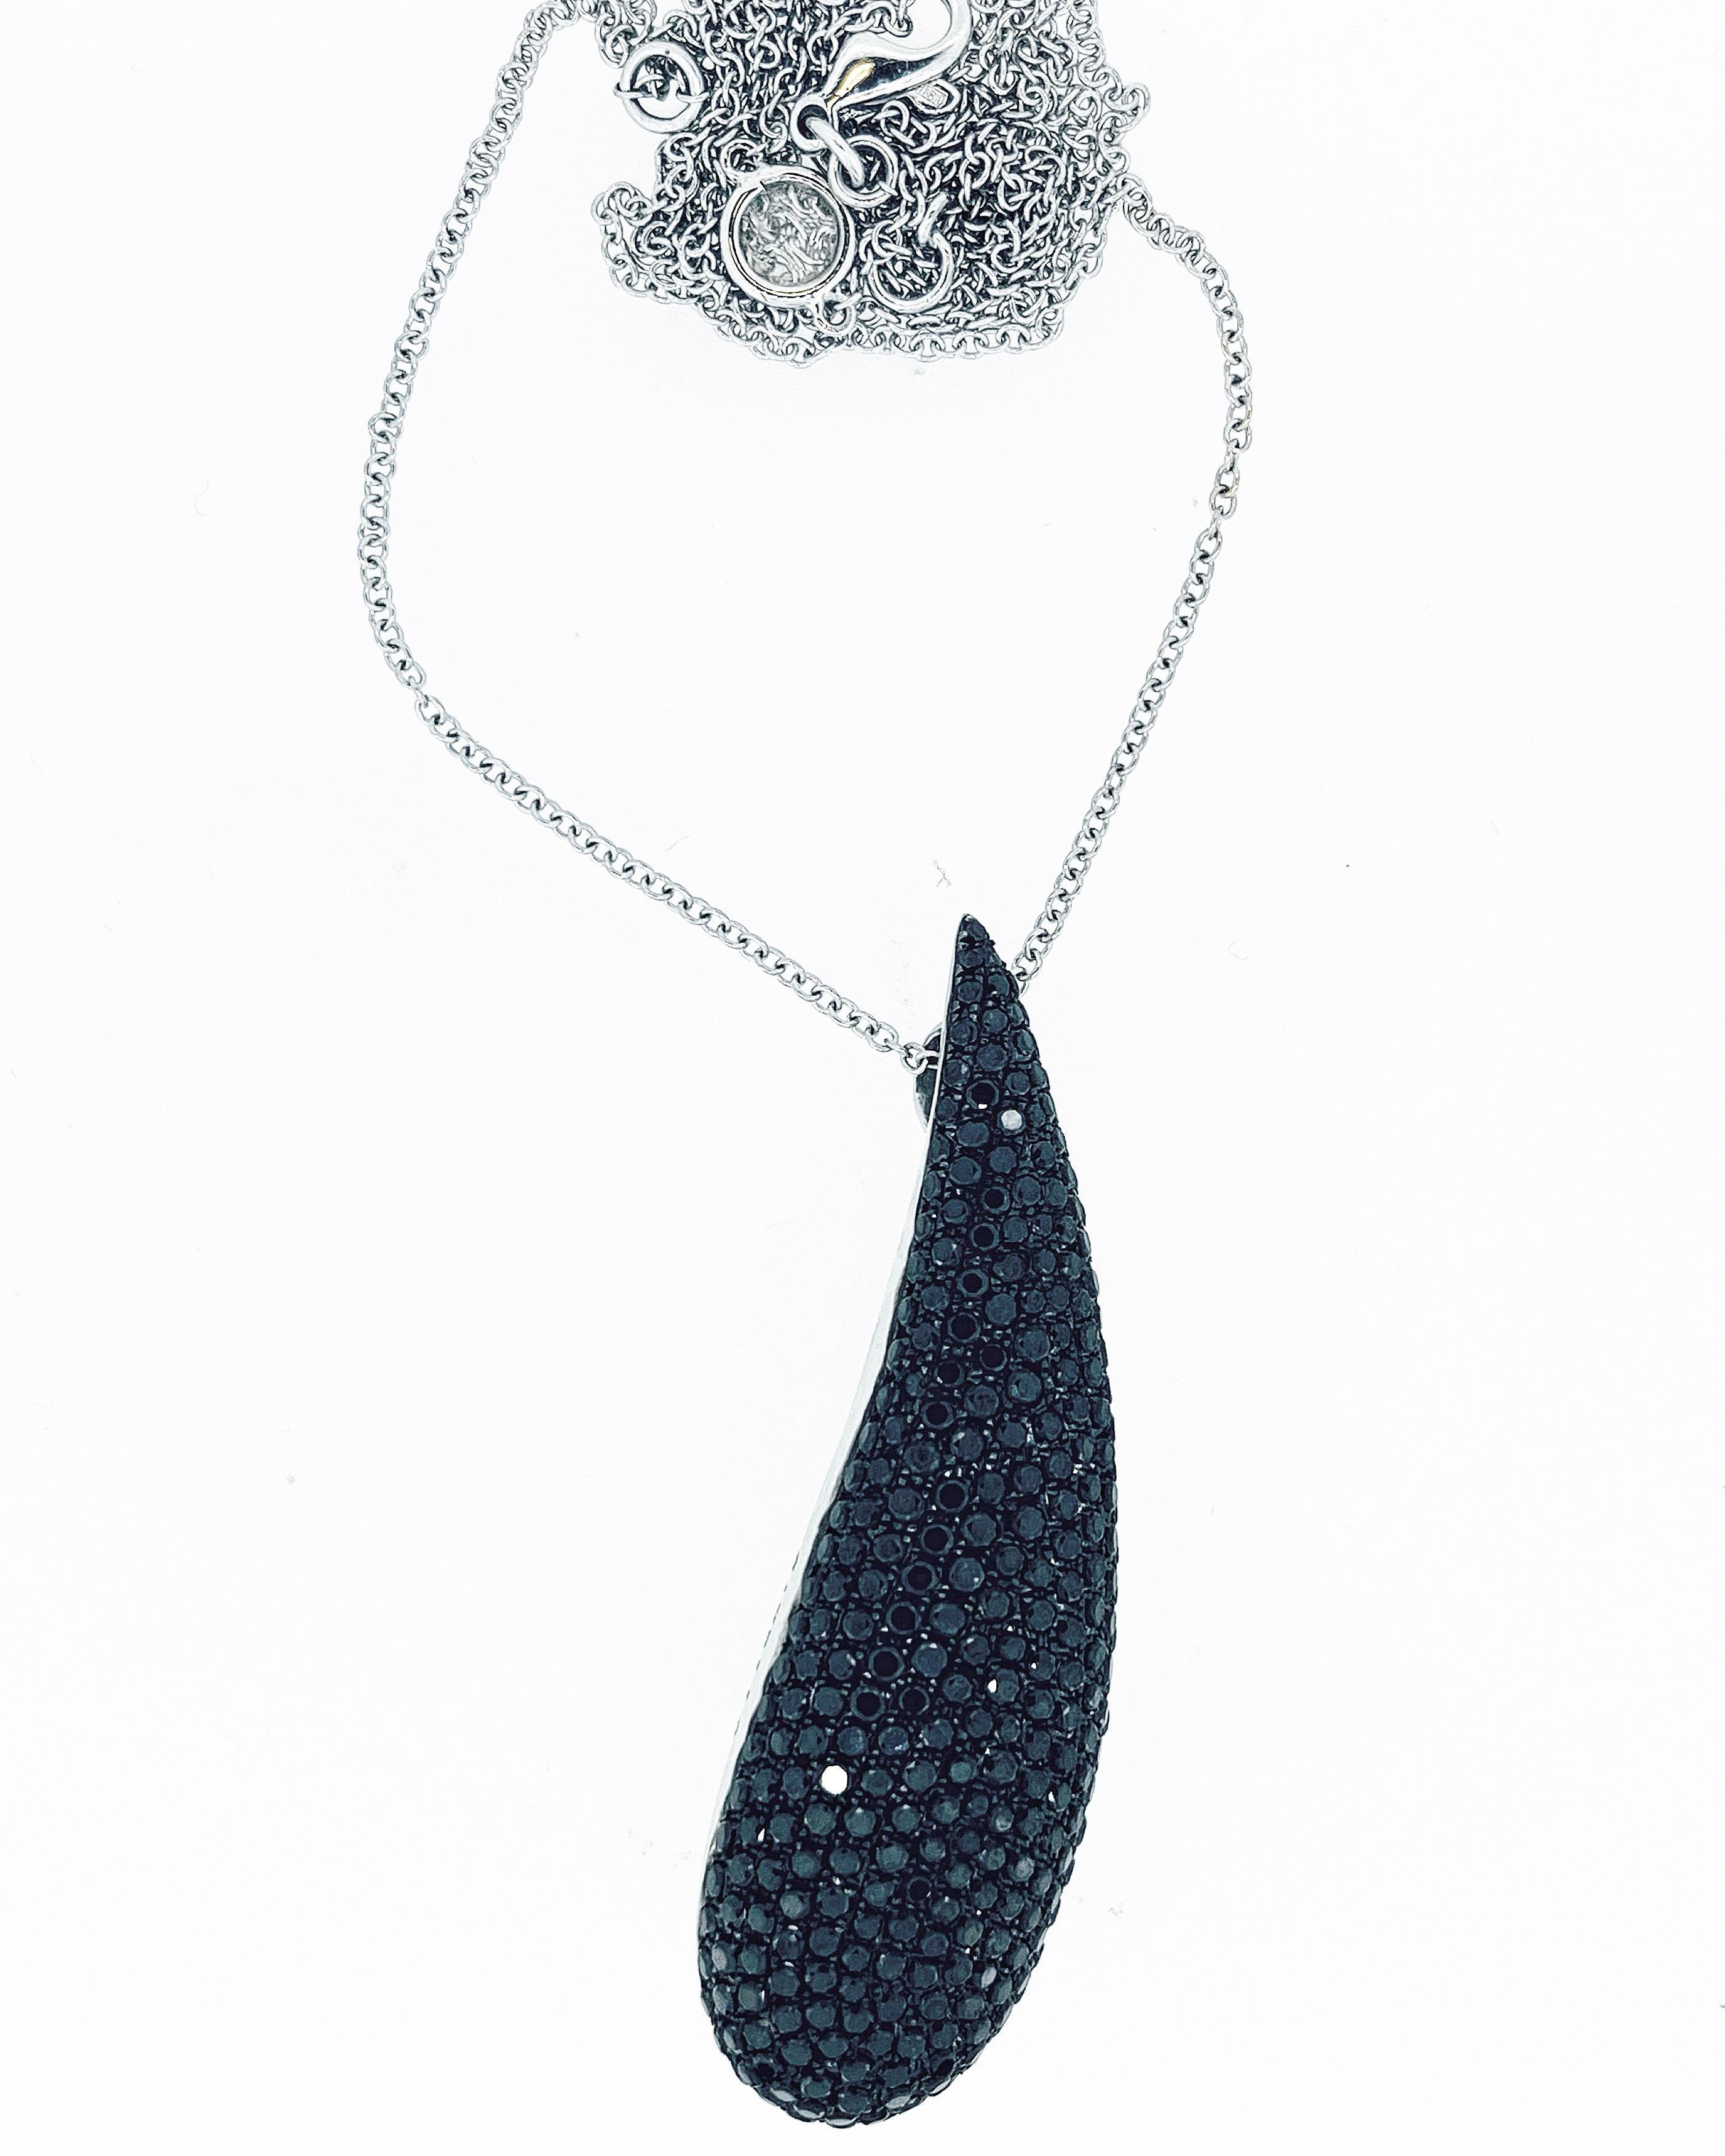 Gavello tear drop shape pendant pave’ set with black diamonds of appropriately 3ct. The 18ct white gold trace chain 80cm long set with a spectacle set rose cut diamond measuring 5mm. Weight: 24.1 Grammes. Circa 1990. Pendant measurements: 5.8cm x